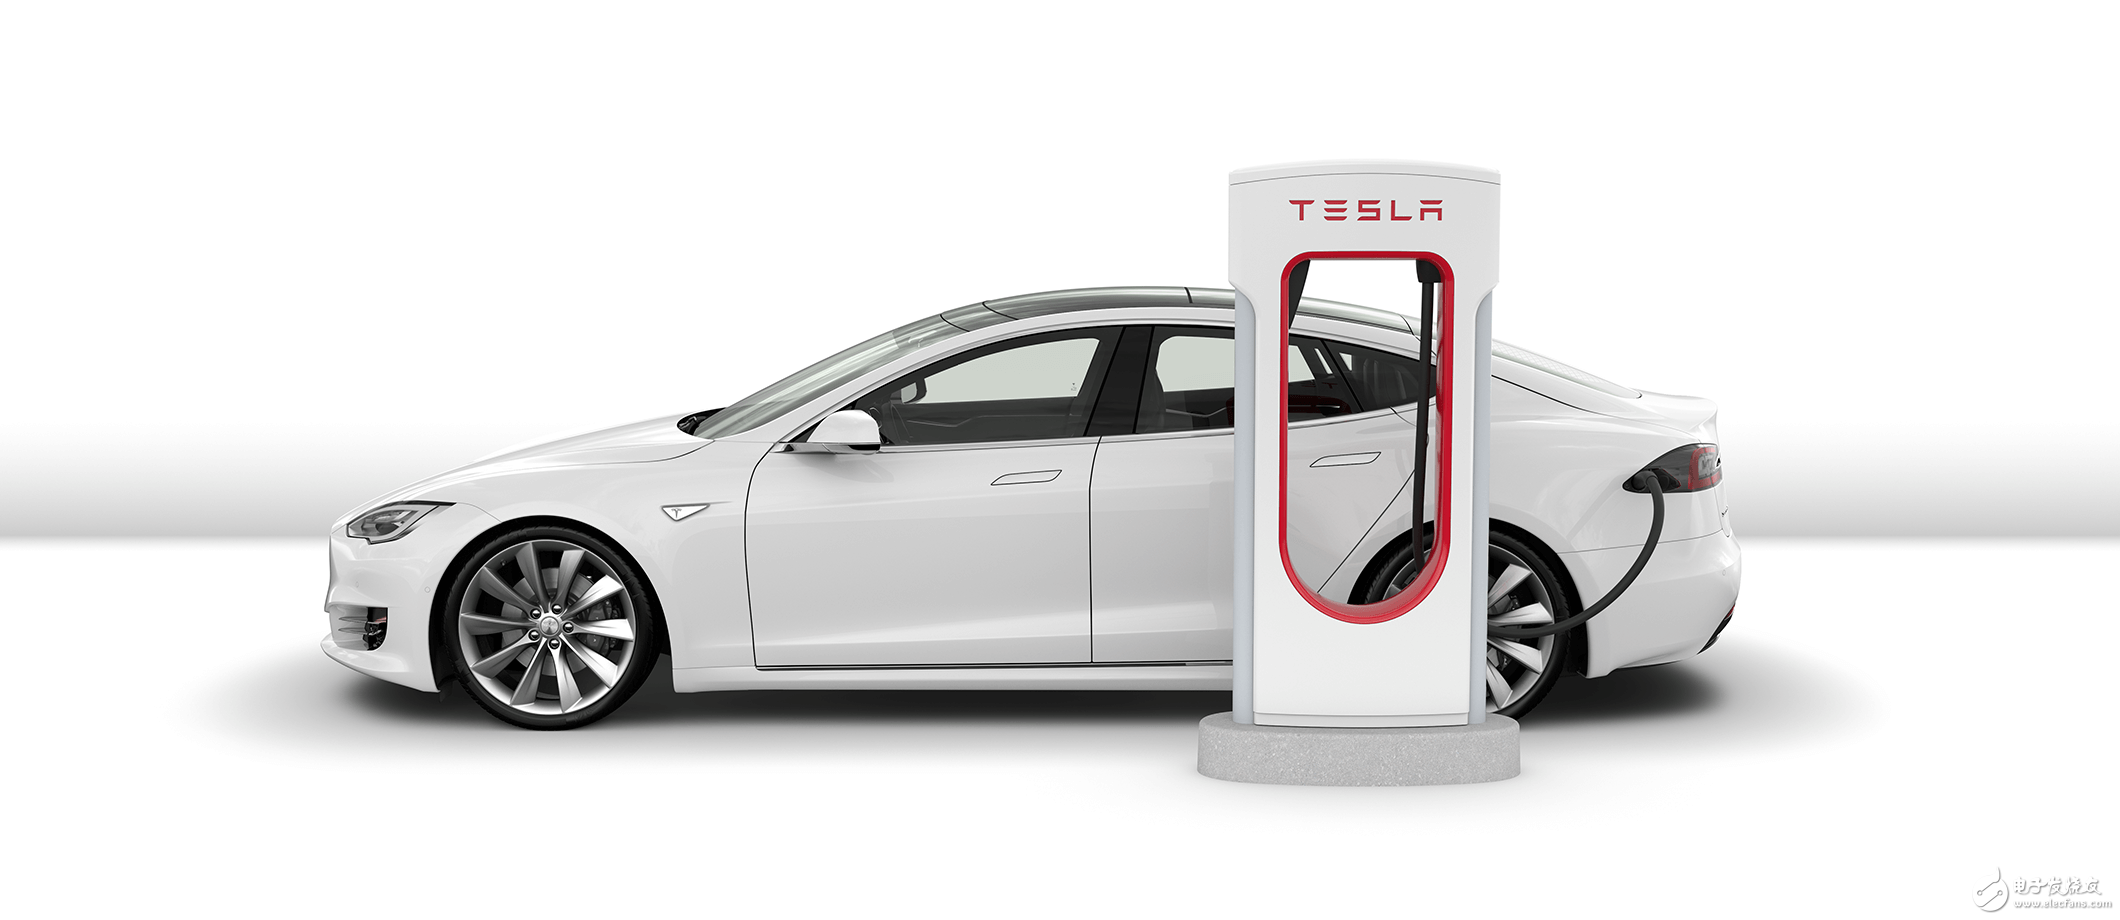 Still dare to fully charge the free parking at the charging station? Tesla will receive 2.6 yuan / minute